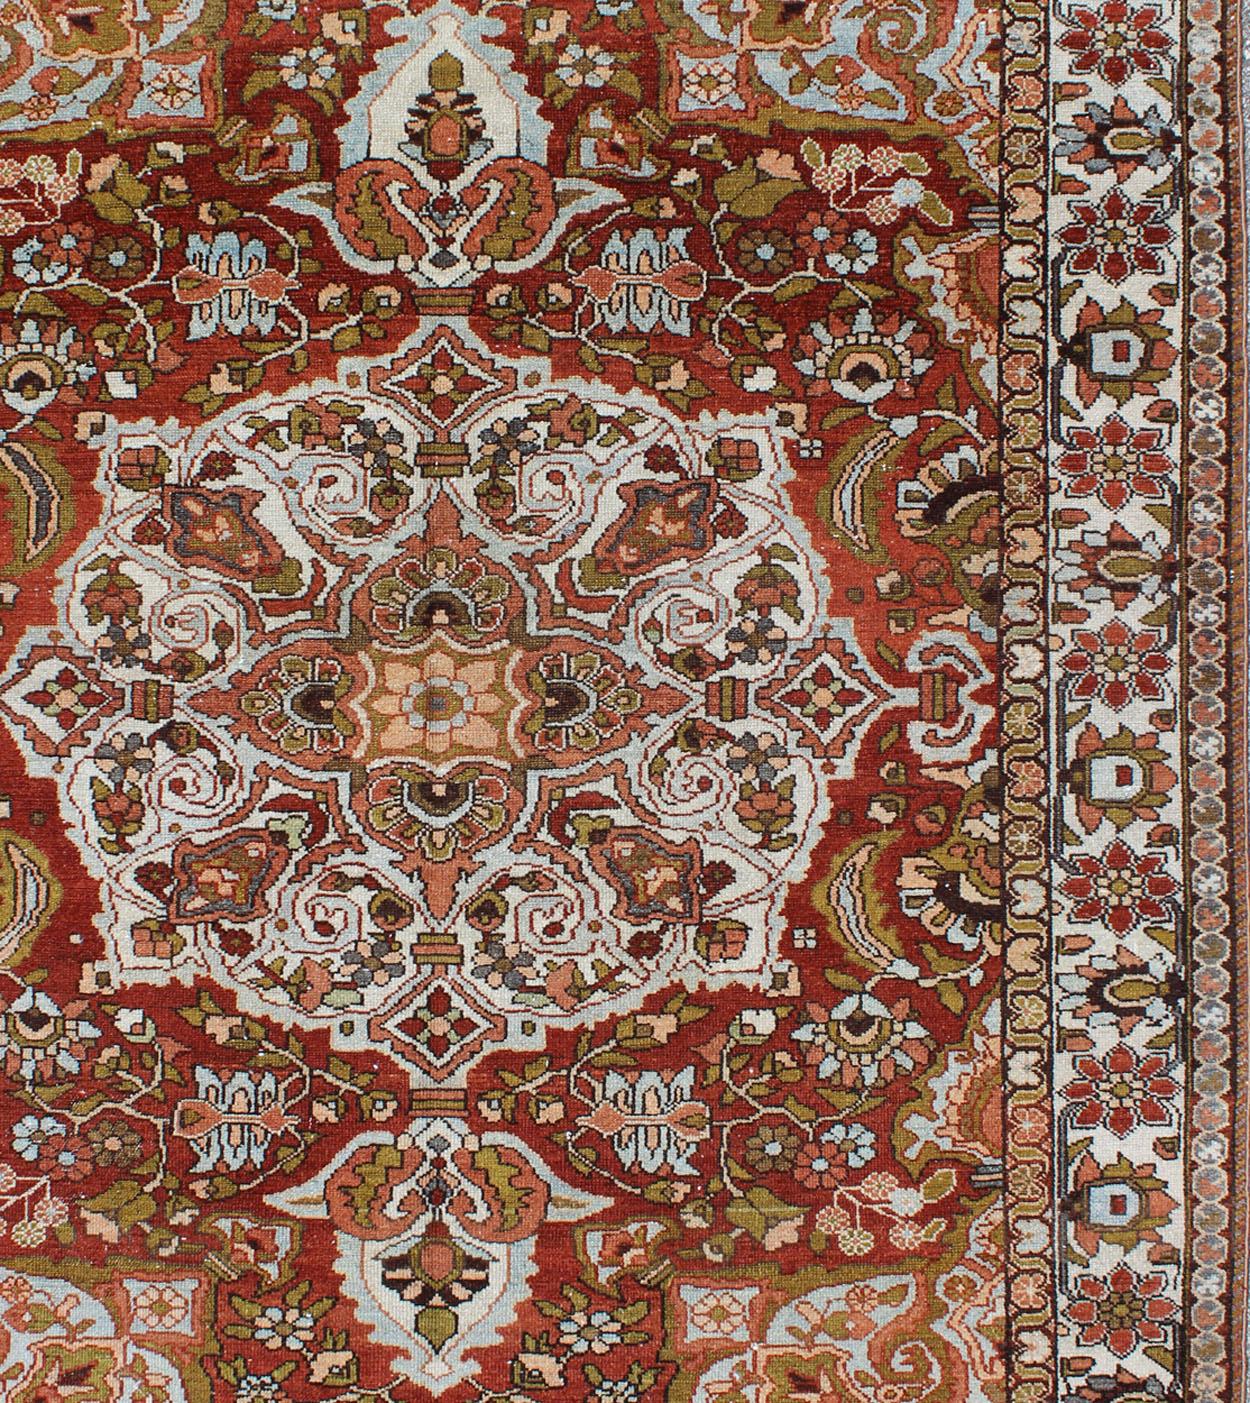 Islamic Antique Persian Bakhtiari Rug with Classic Ornate Central Medallion Design For Sale